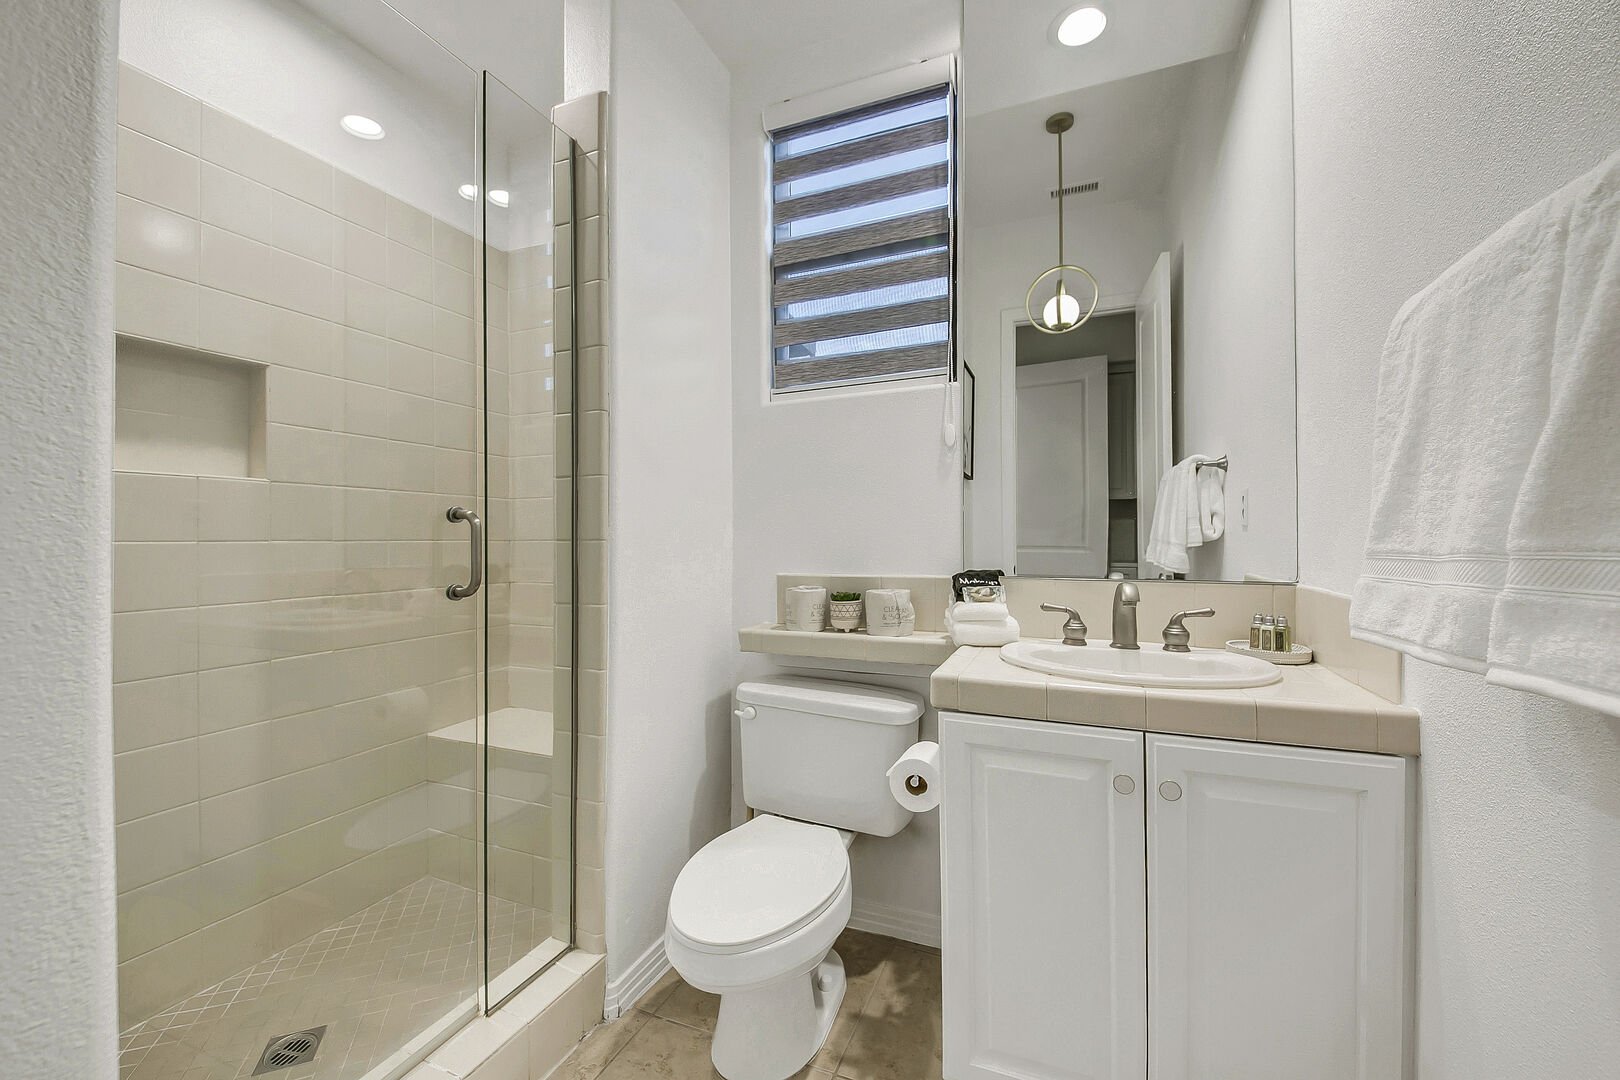 The private en suite bathroom 2 features a tile shower and a vanity sink.